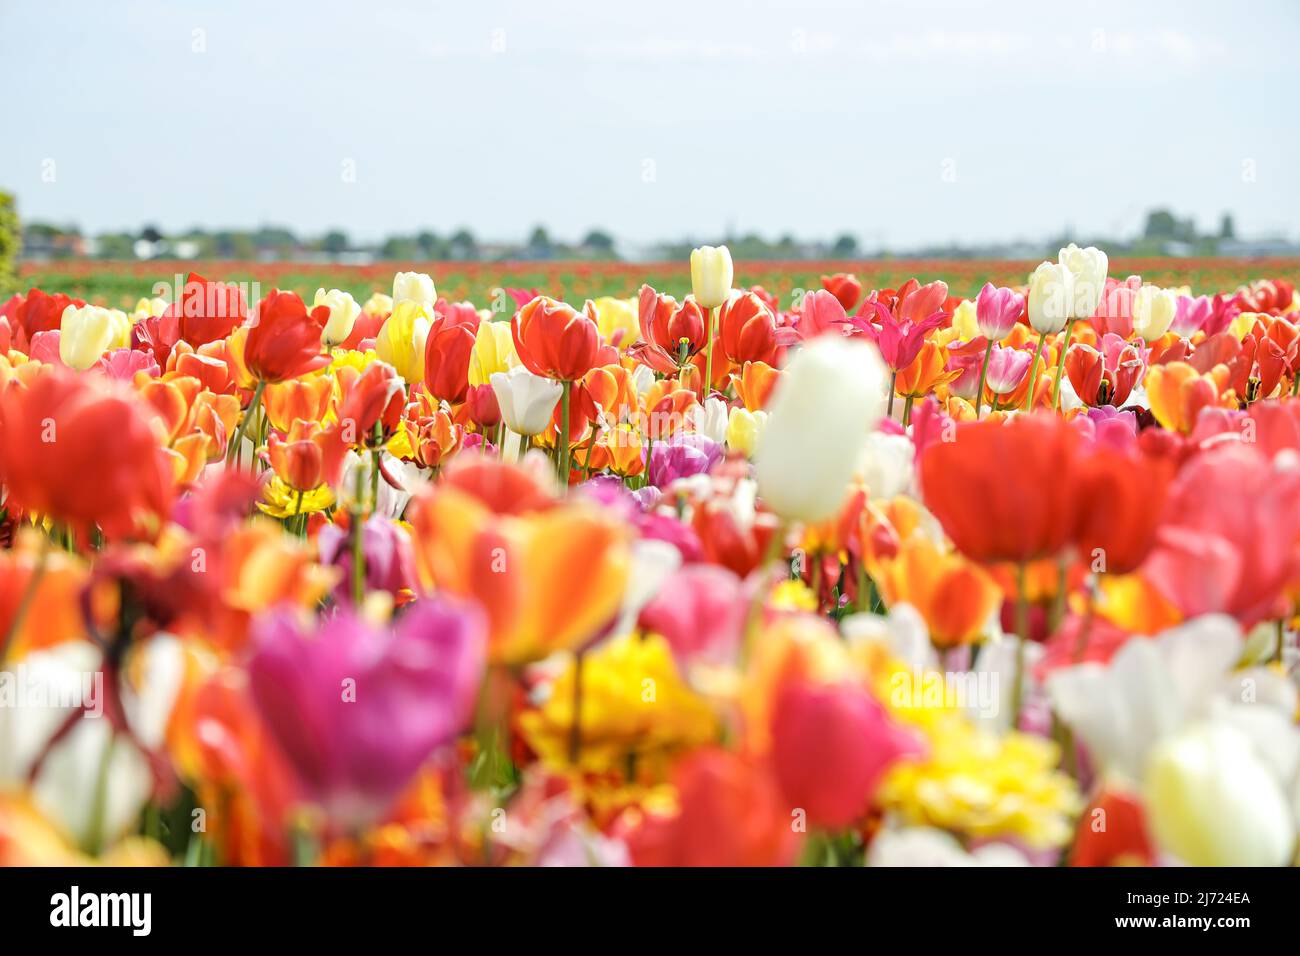 2022-05-04 12:31:44 De Zilk, May 4, 2022. A colorful tulip field in the bulb region. ANP / Dutch Height / Sandra Uittenbogaart netherlands out - belgium out Stock Photo